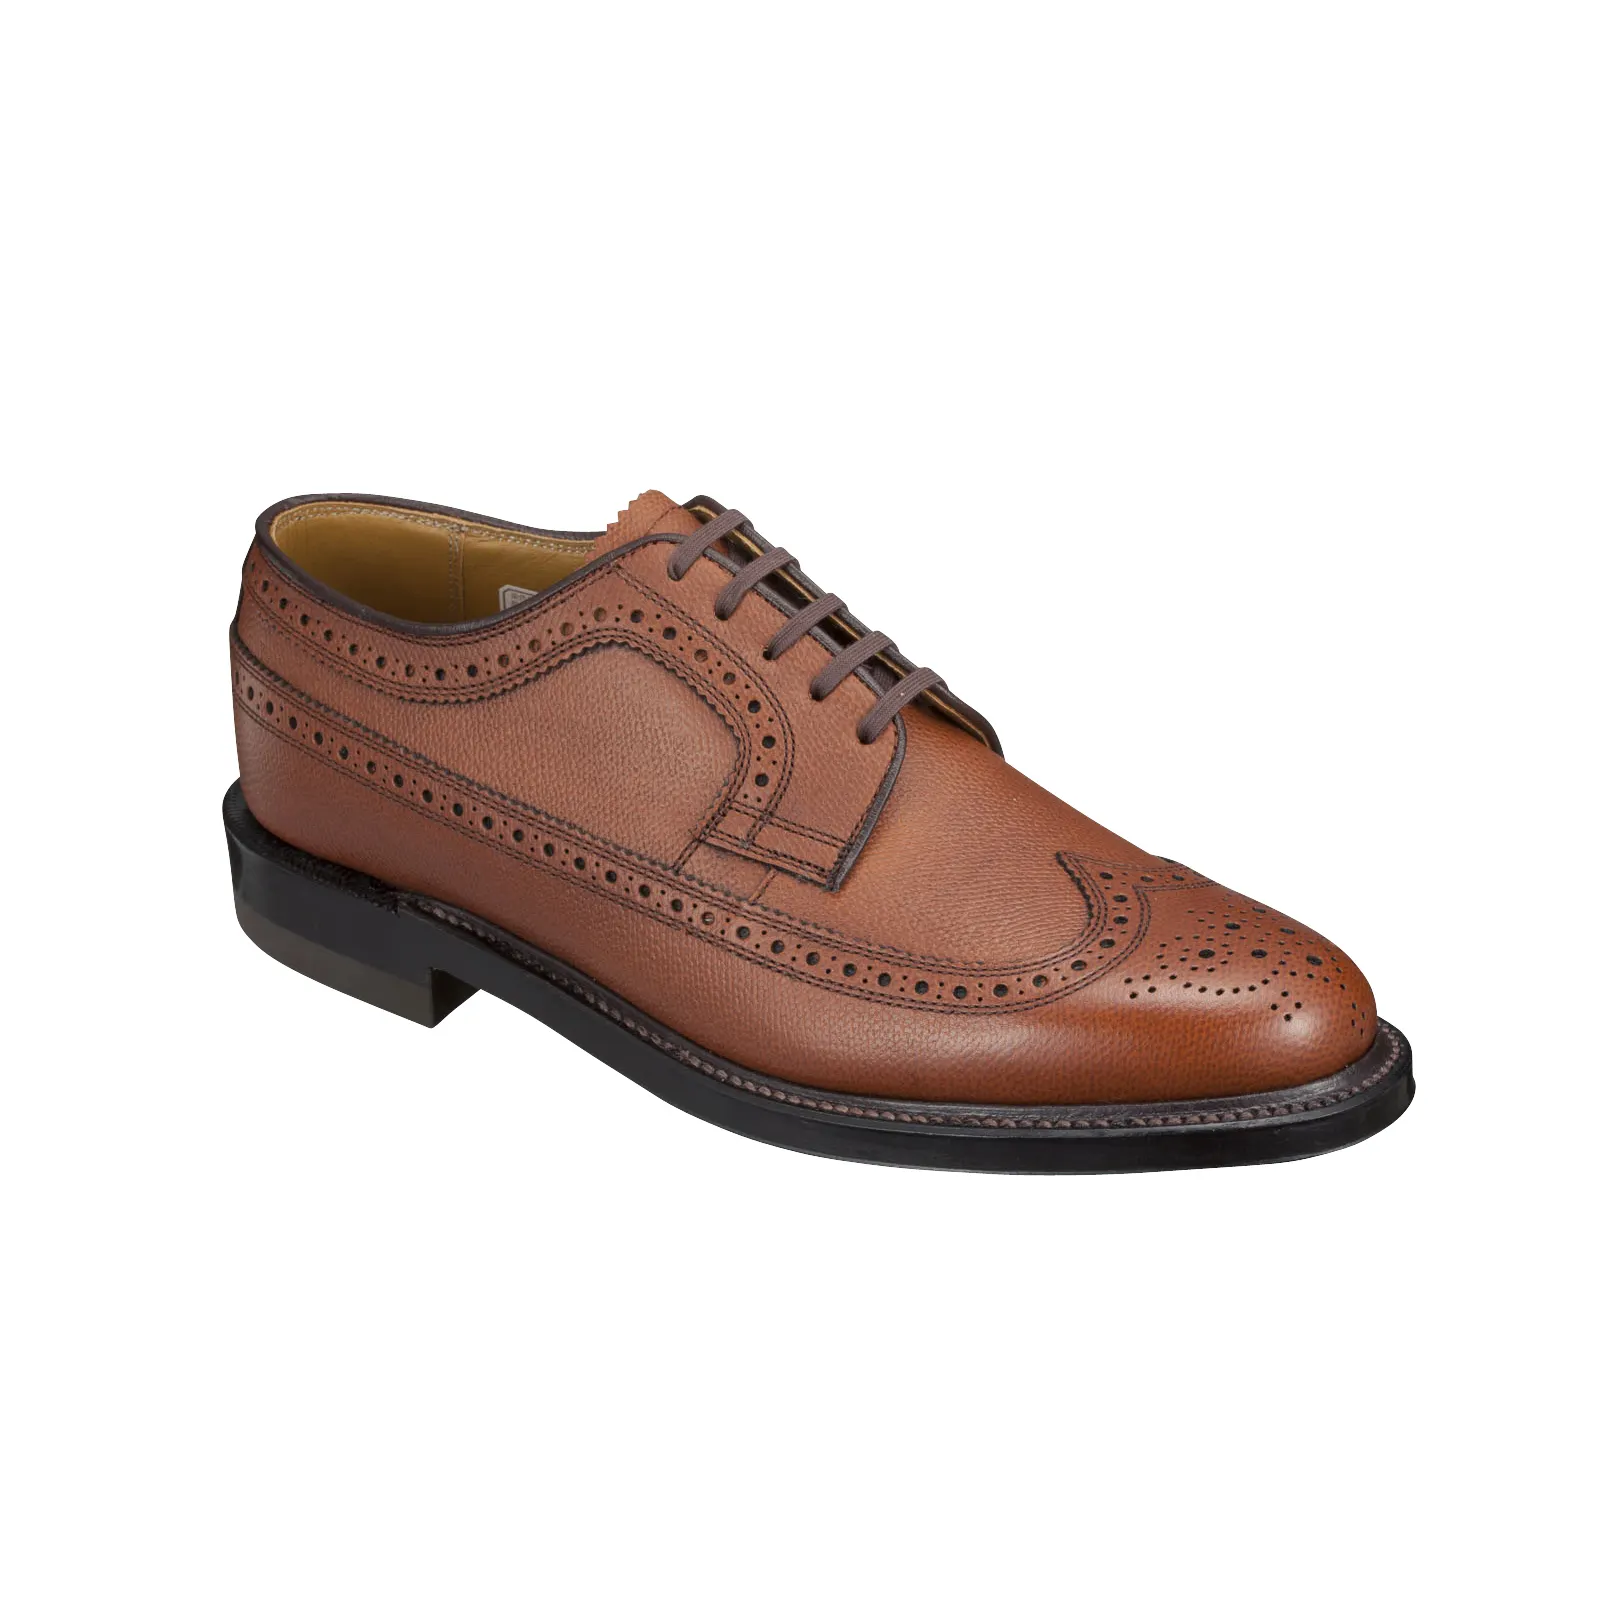 Men's Oxford shoes Casual